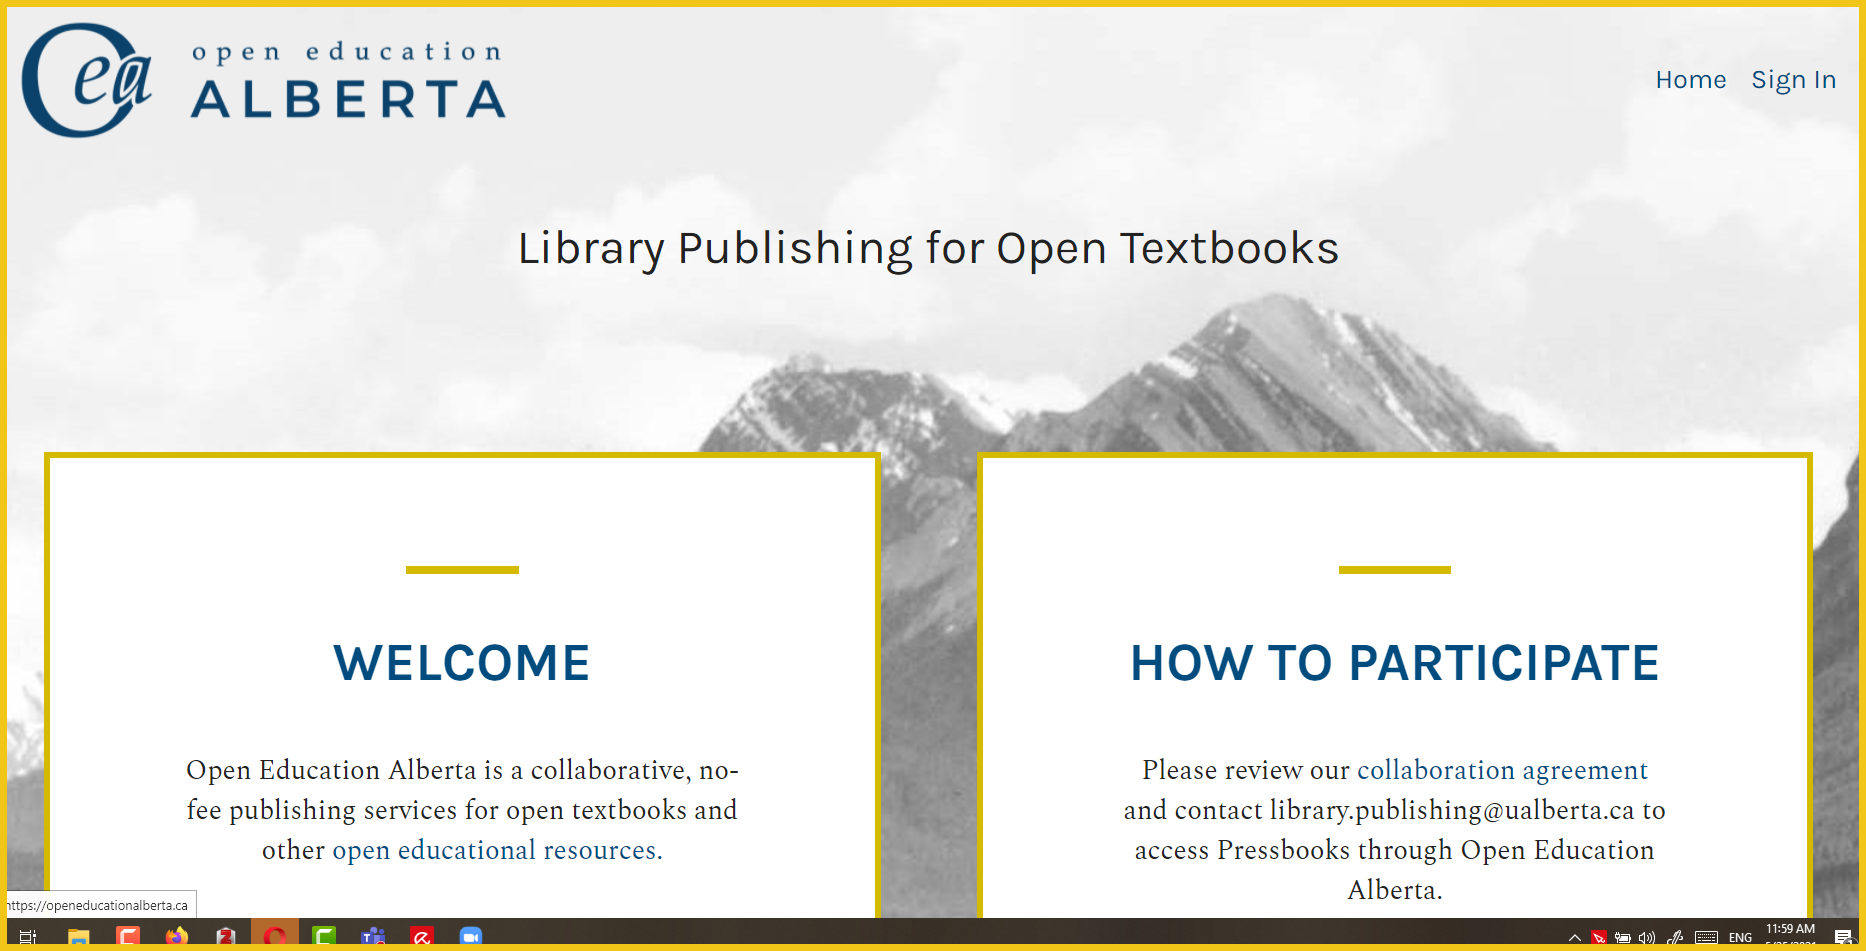 The image shows the Open Education Alberta landing page